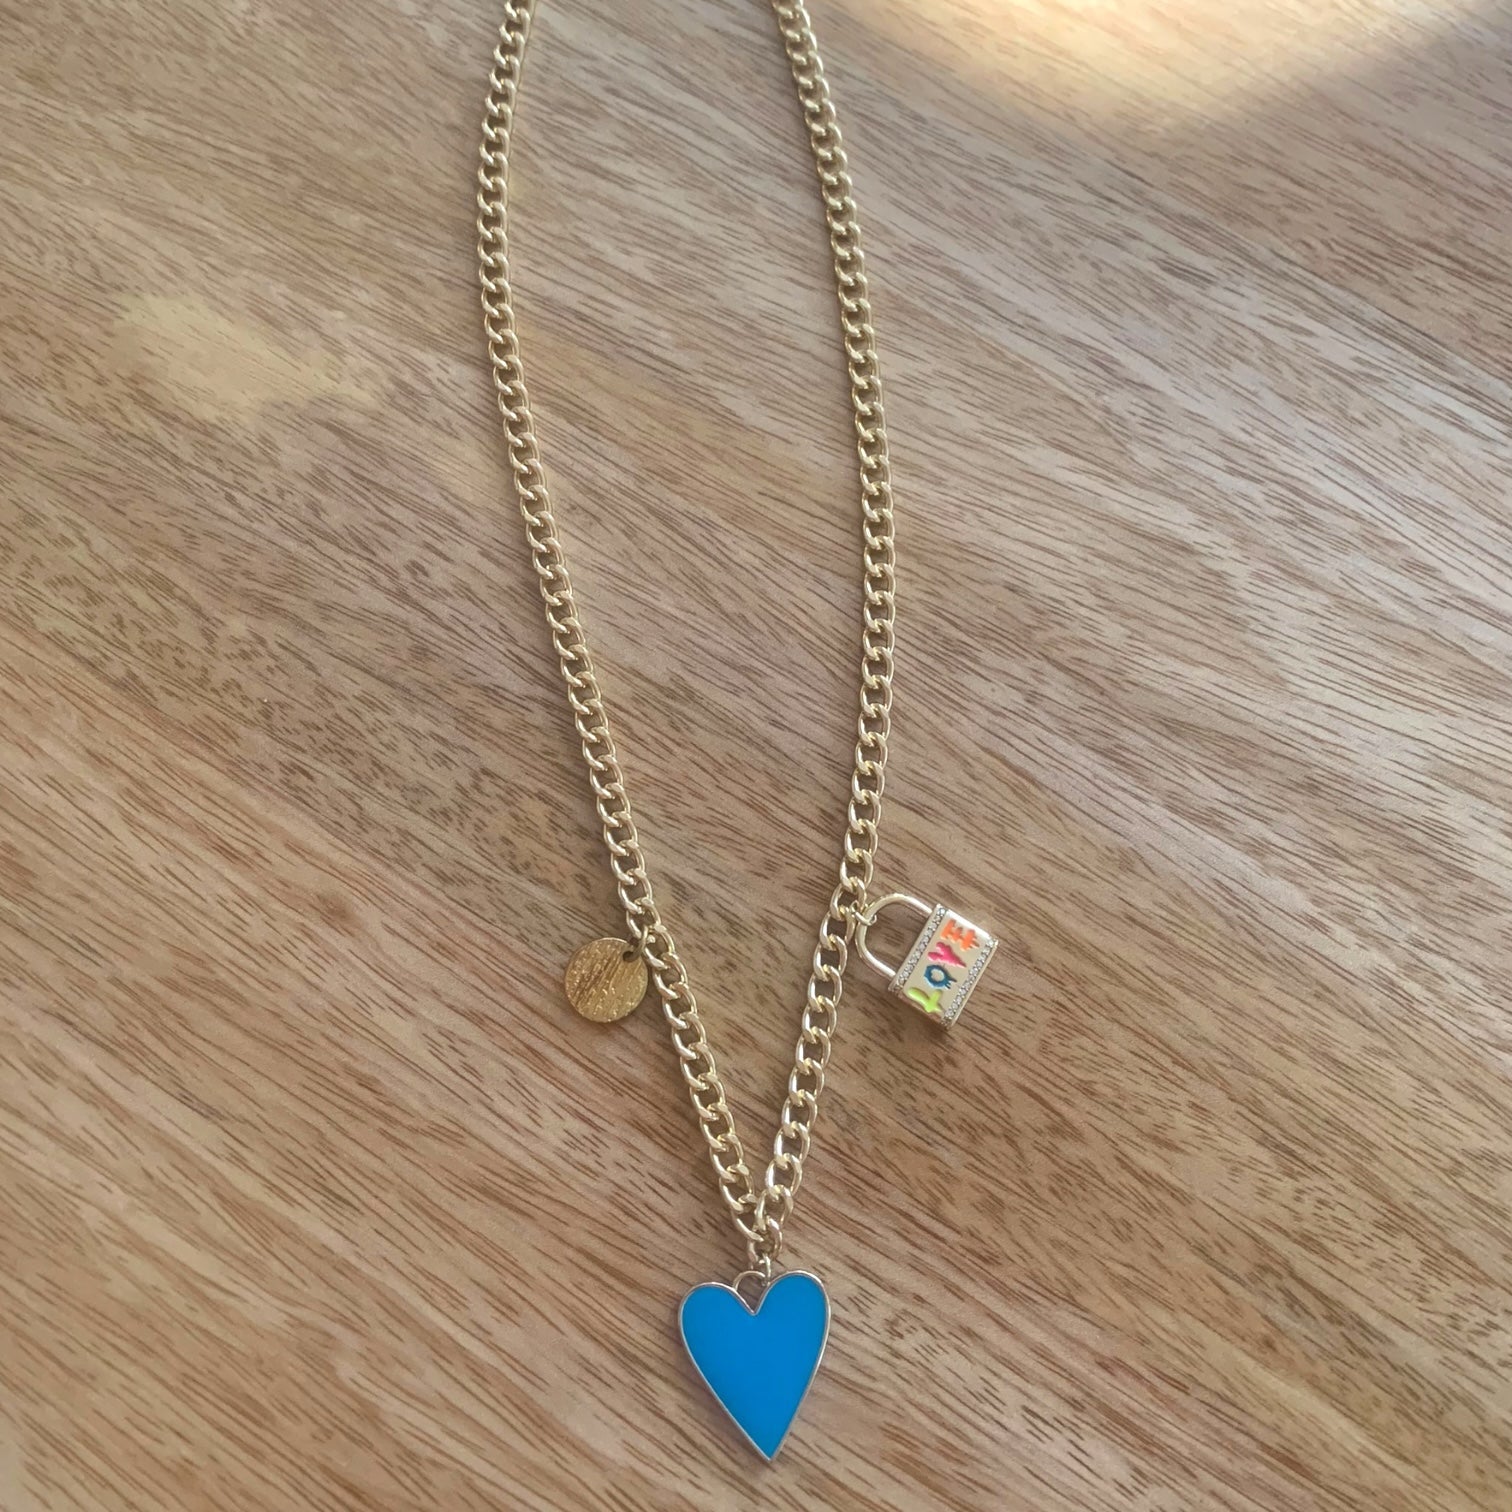 1 of 1 Blue Heart and Gold Love Charm Statement Necklace-Necklace